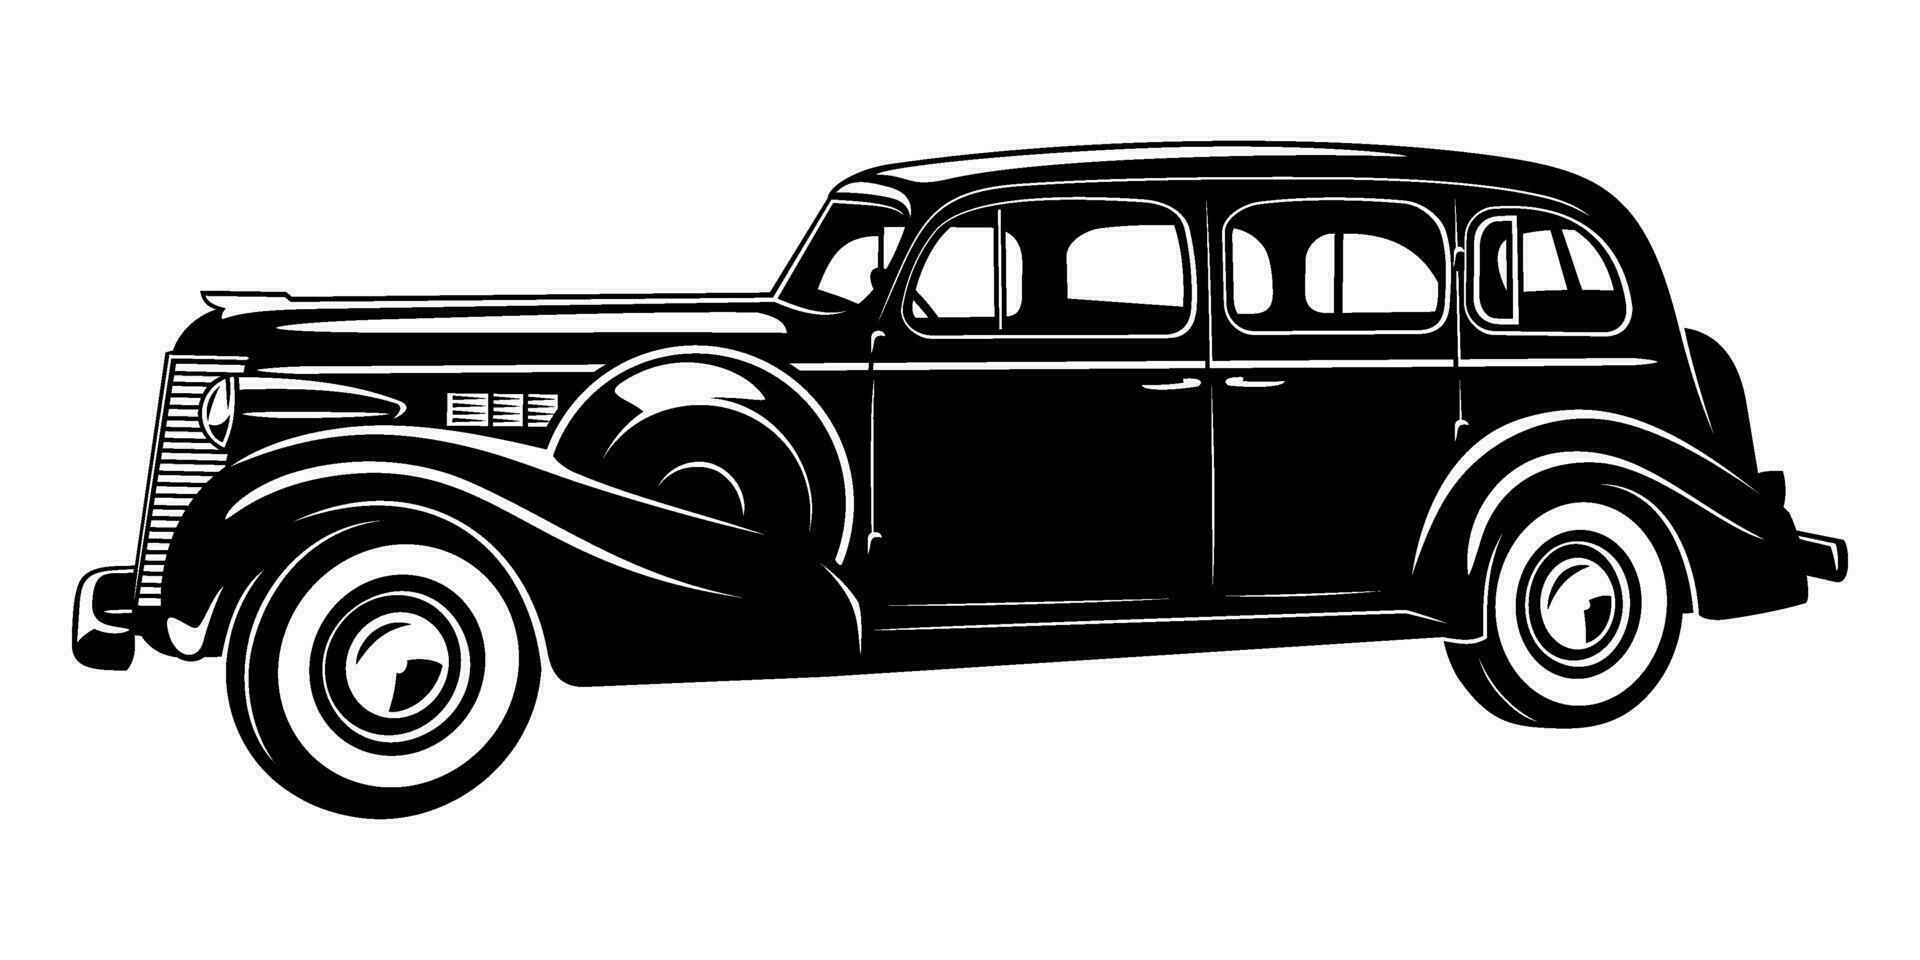 Classic Vintage Car of 30s. Vector silhouette isolated on white.